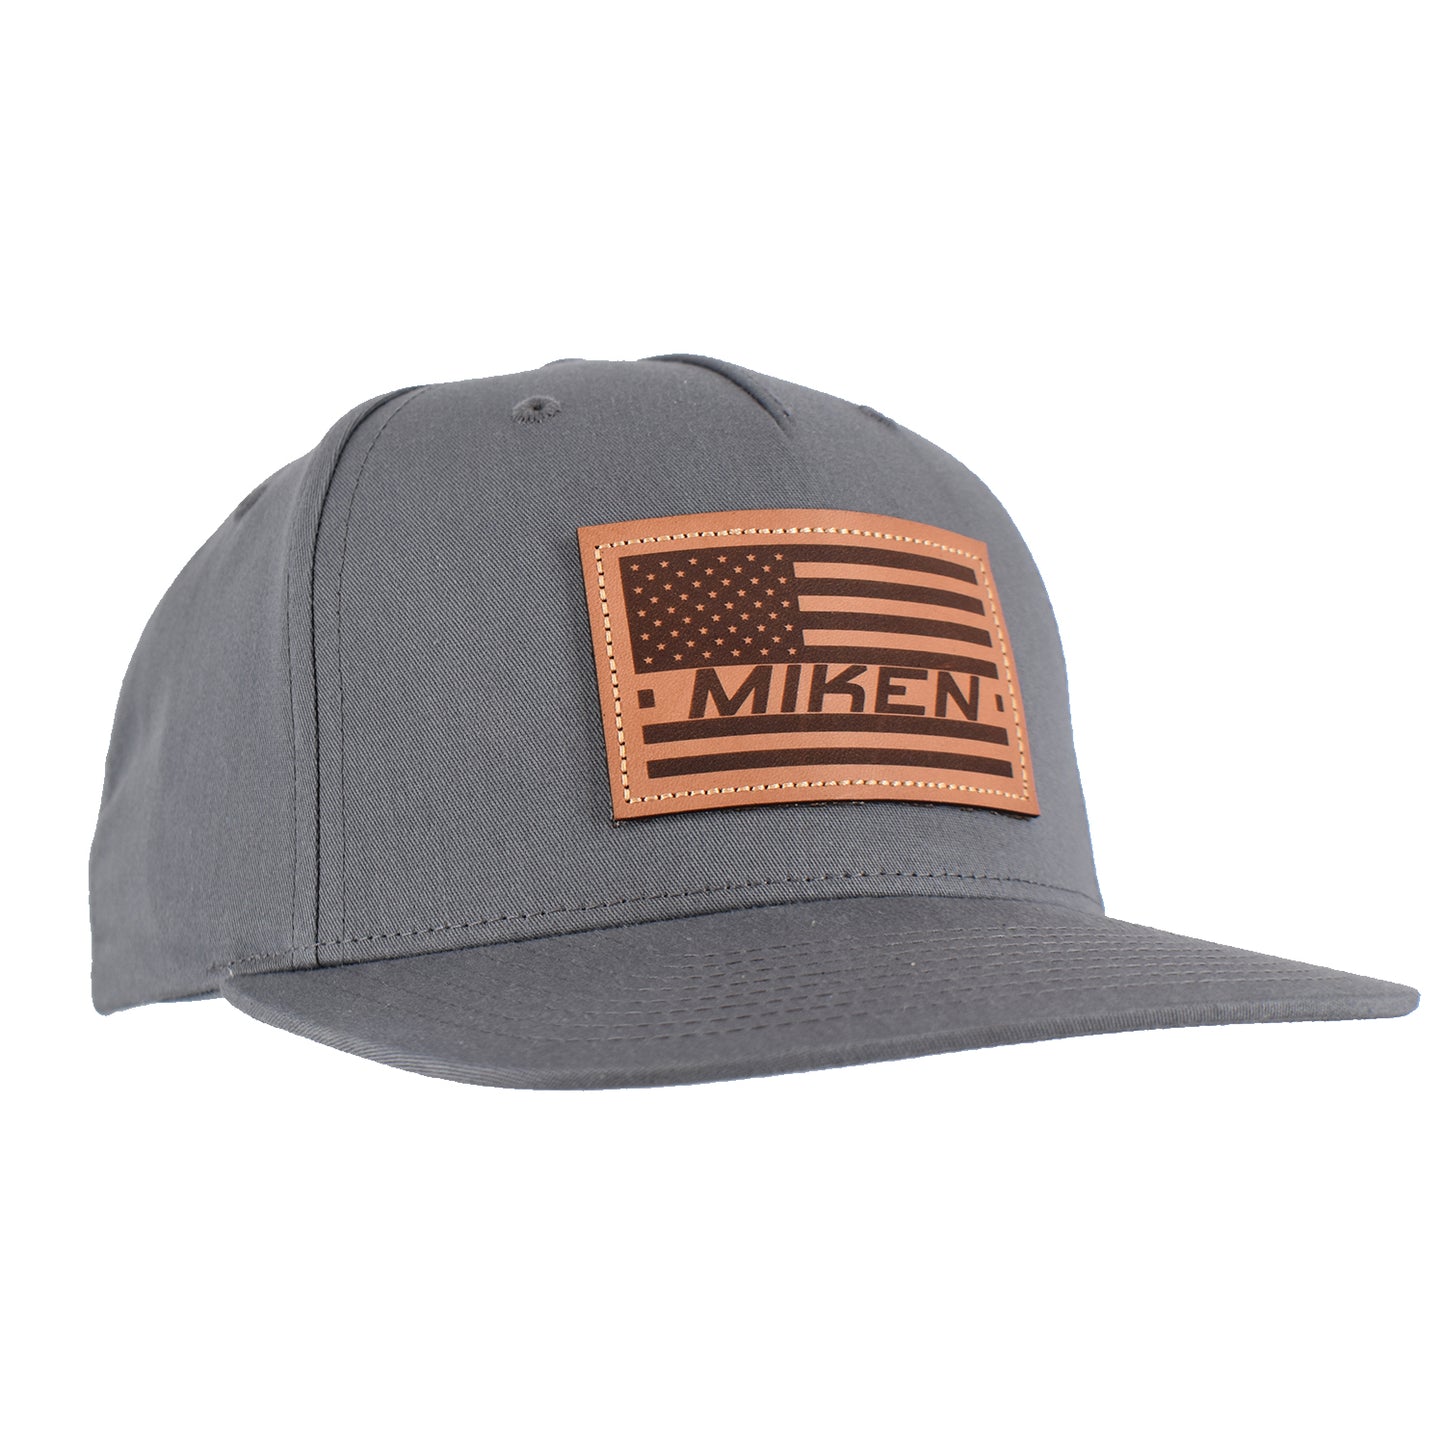 Miken Streetwear Snapback Hat- 255 All Grey/Miken USA Leather Patch